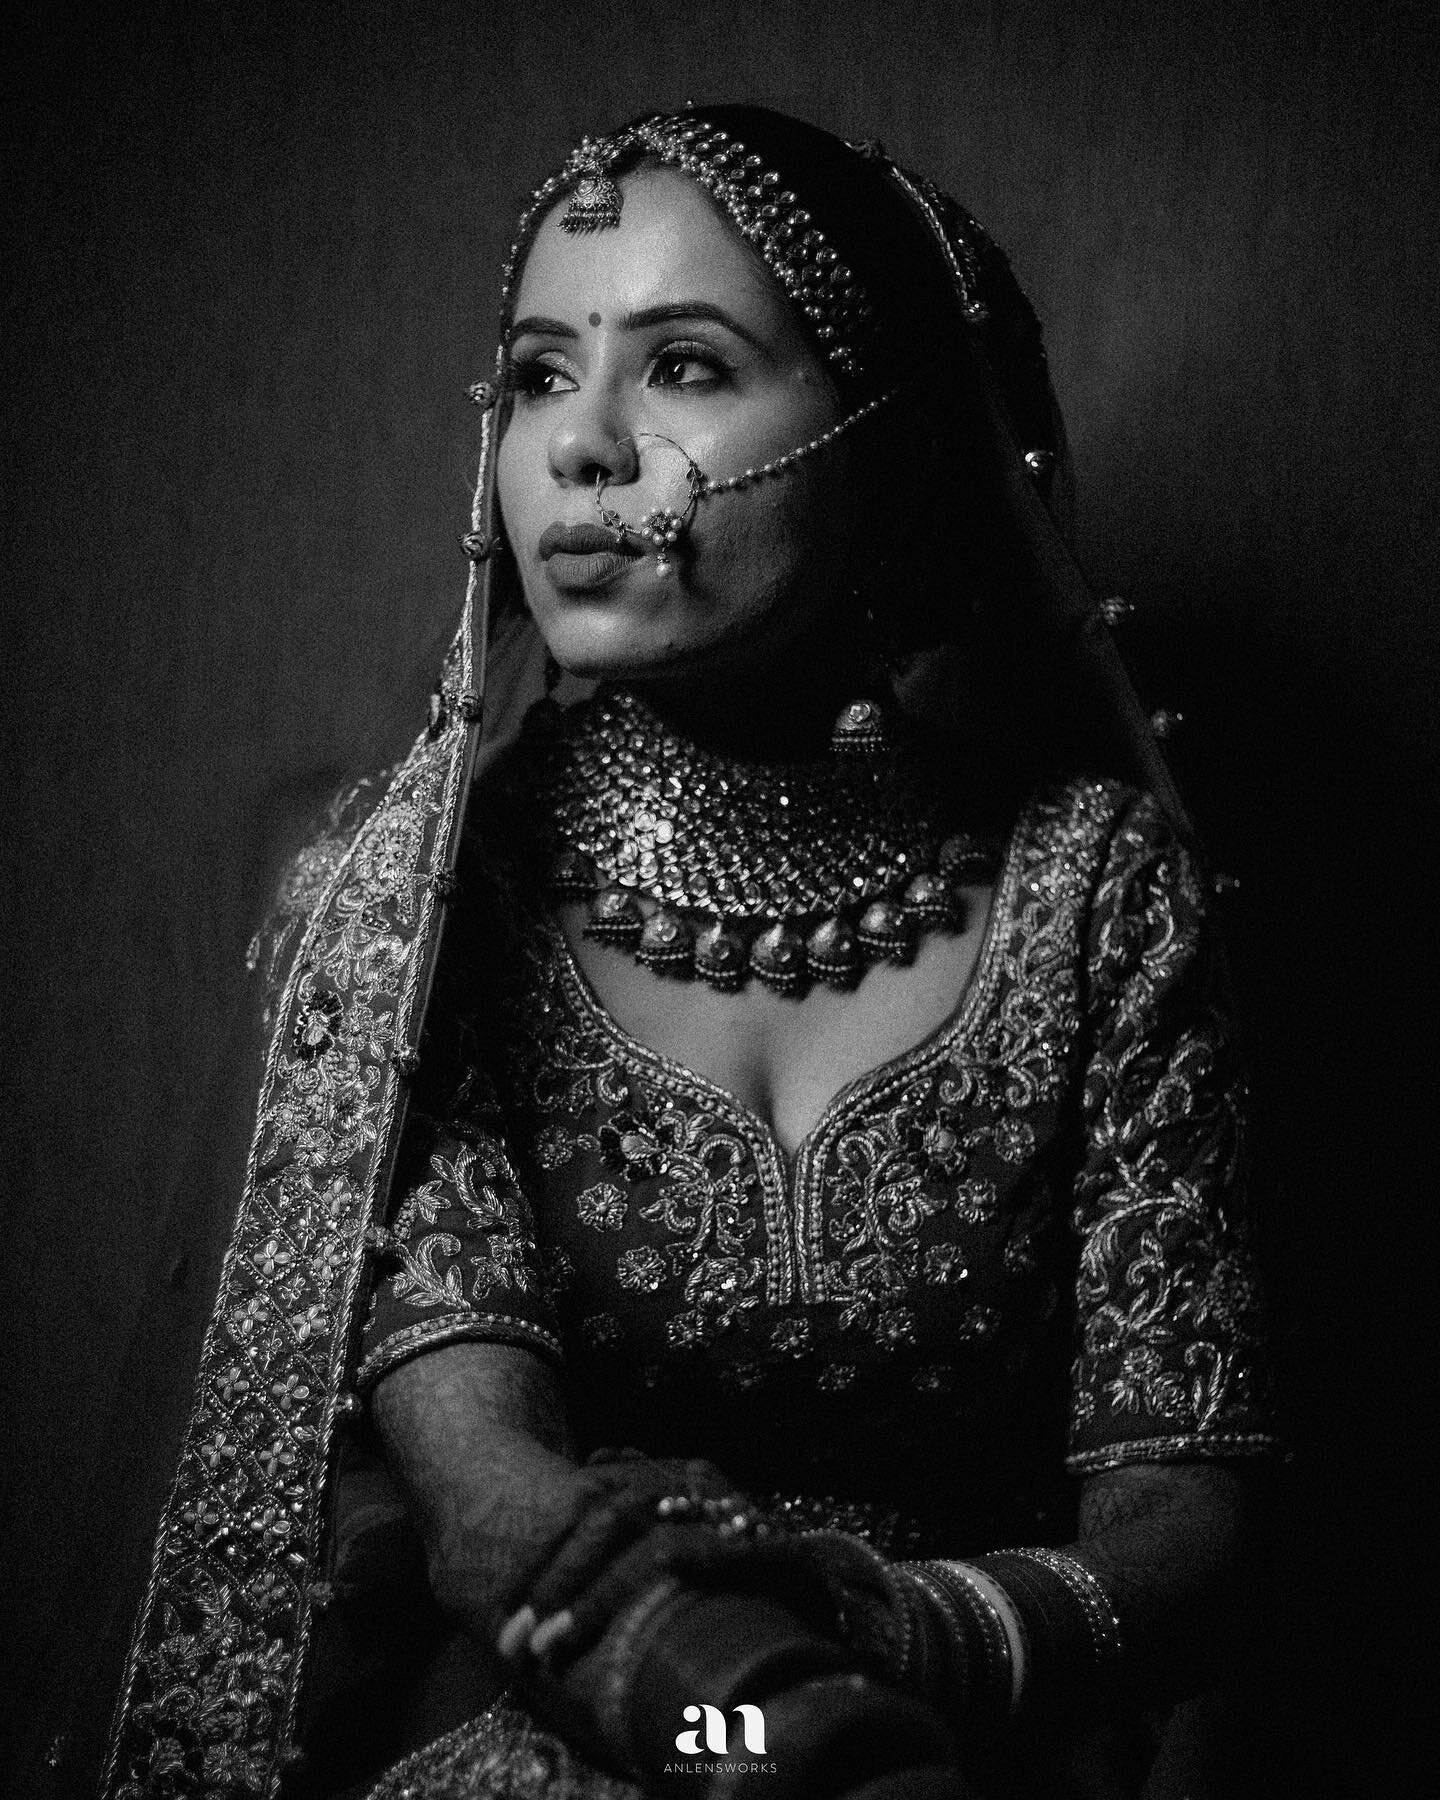 Nisha looking stunning on her wedding day ✨
@a_discovered_life 
.
PS- Let me know which one do you like more 🥰